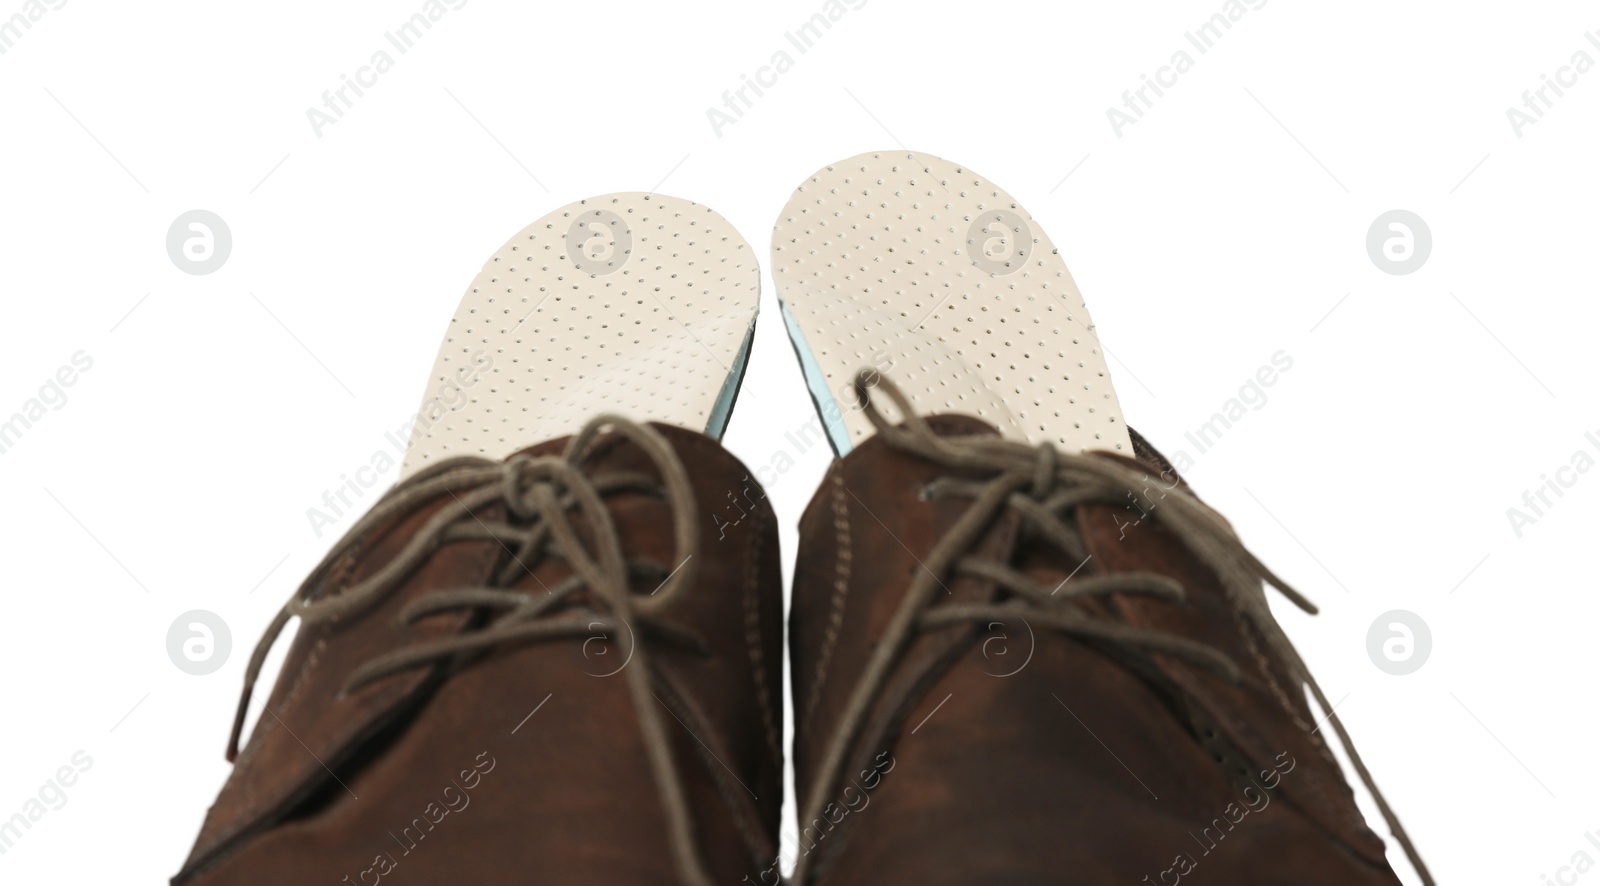 Photo of Orthopedic insoles in shoes on white background, closeup